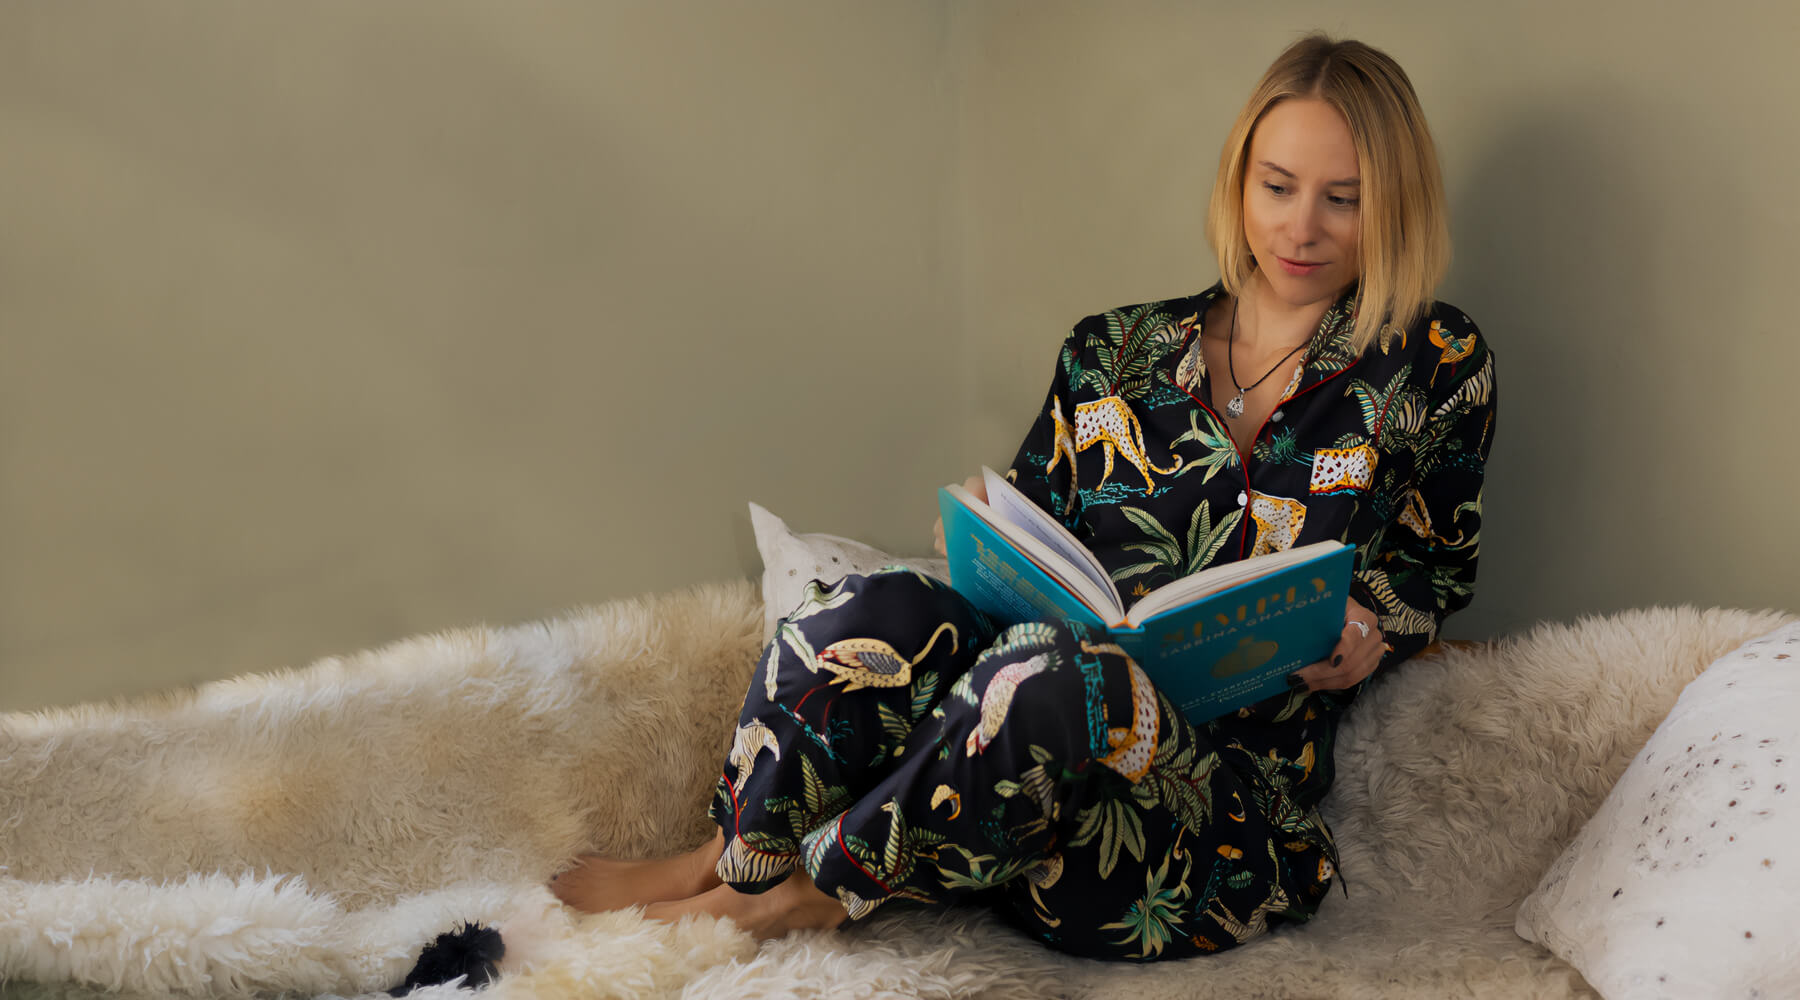 Girl relaxing in jungle print pyjamas while reading a book